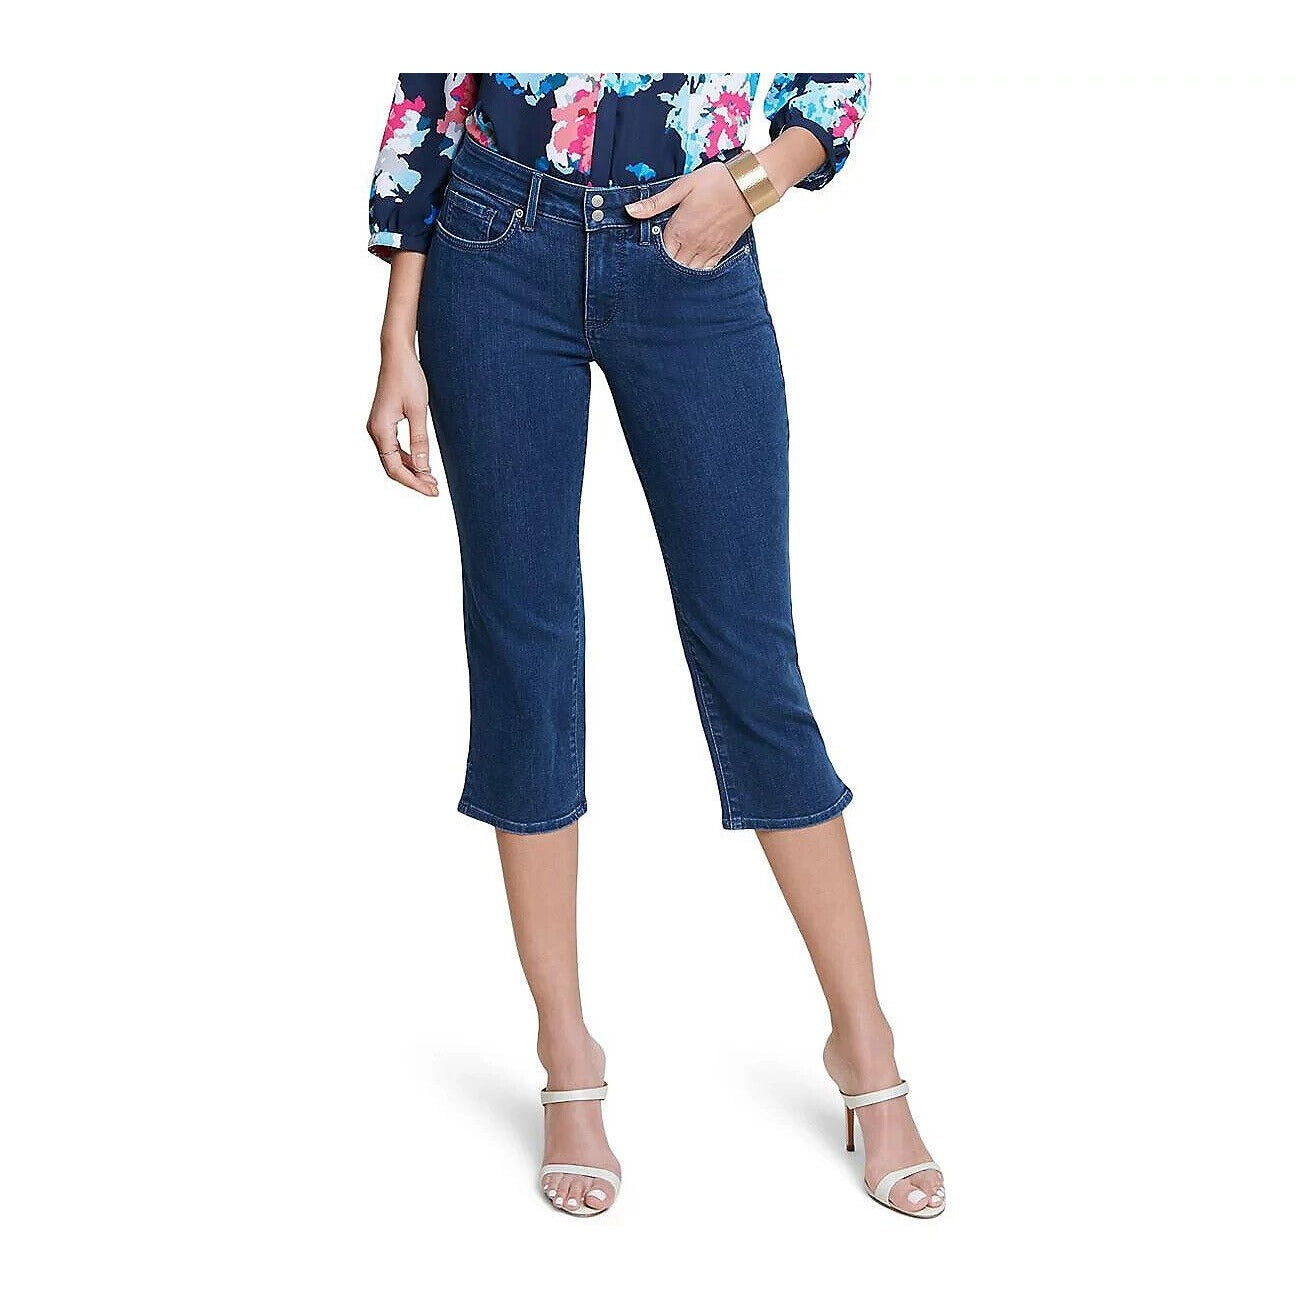 Curves 360 by NYDJ Slim Straight Ankle Jeans w/Side Slits 